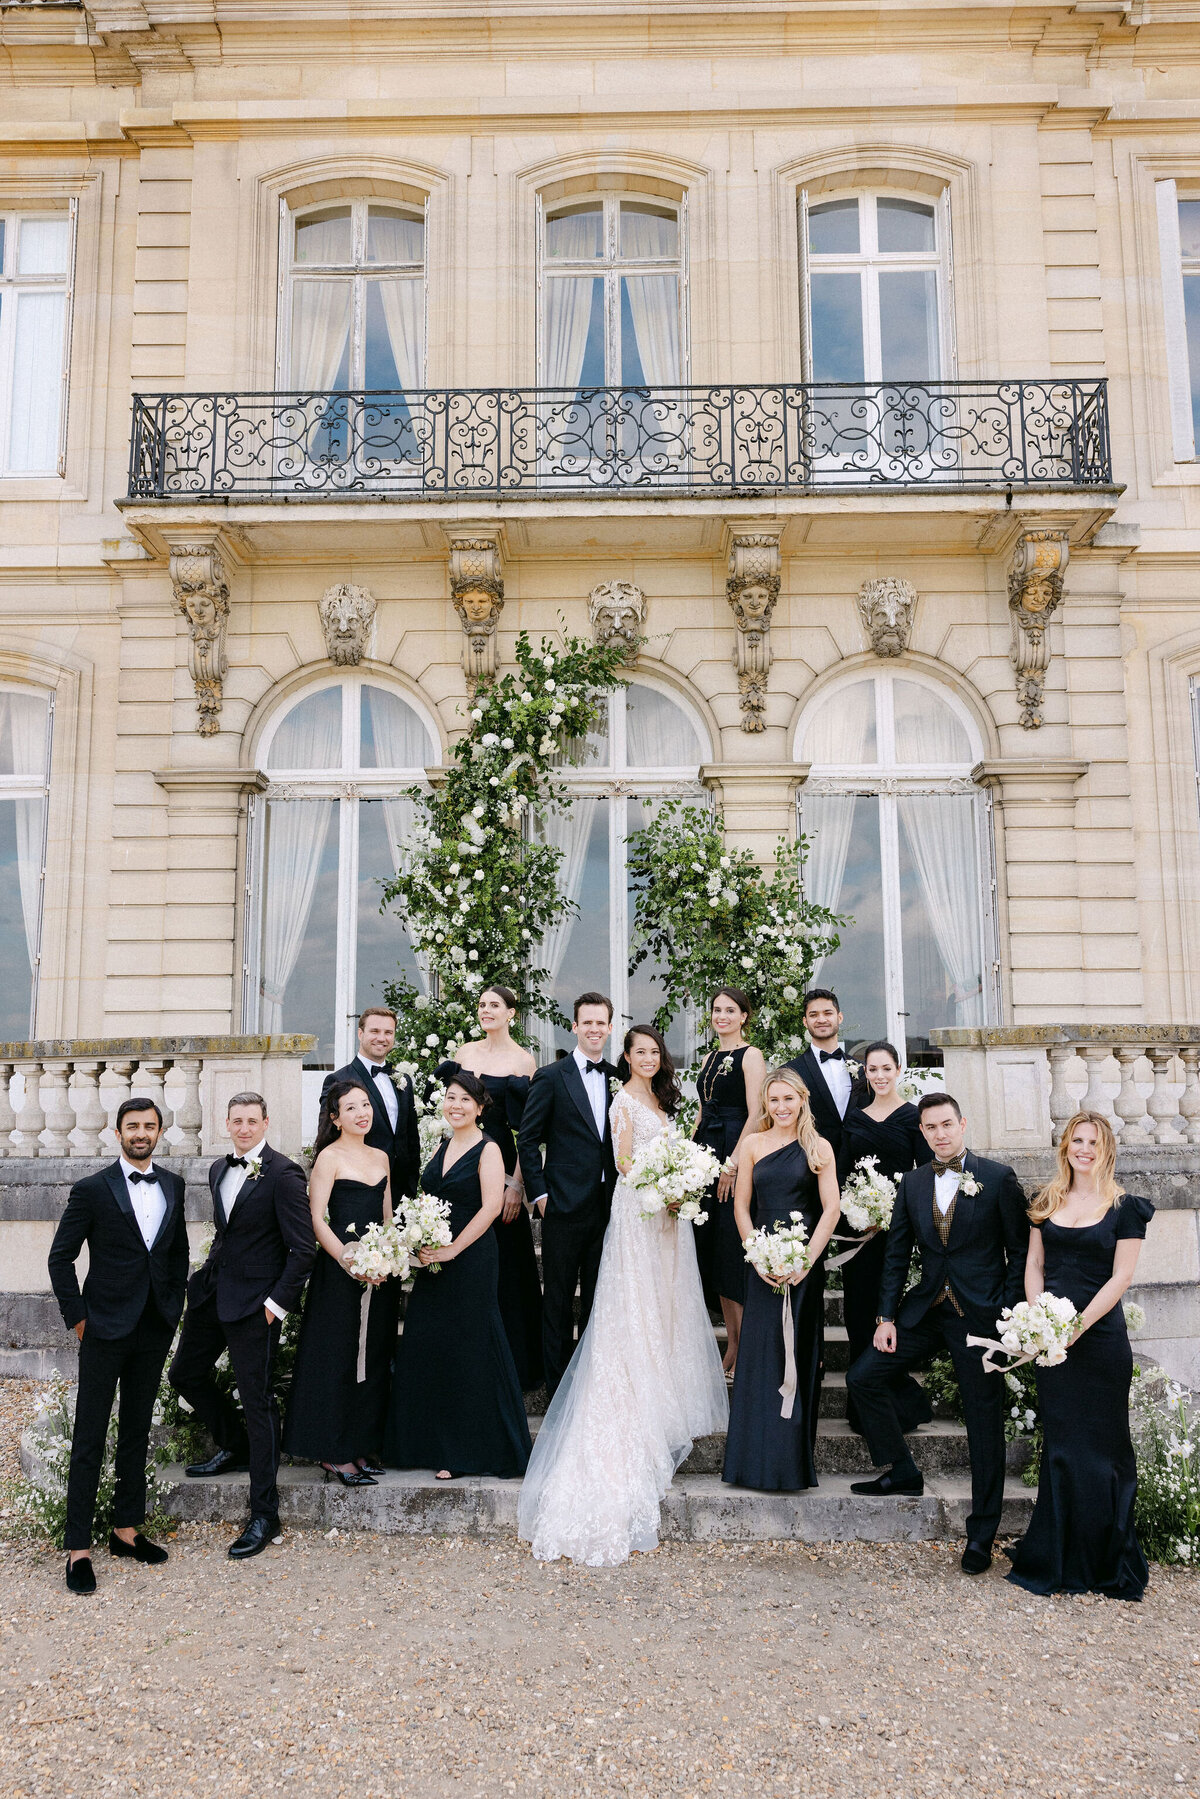 Jennifer Fox Weddings English speaking wedding planning & design agency in France crafting refined and bespoke weddings and celebrations Provence, Paris and destination 379